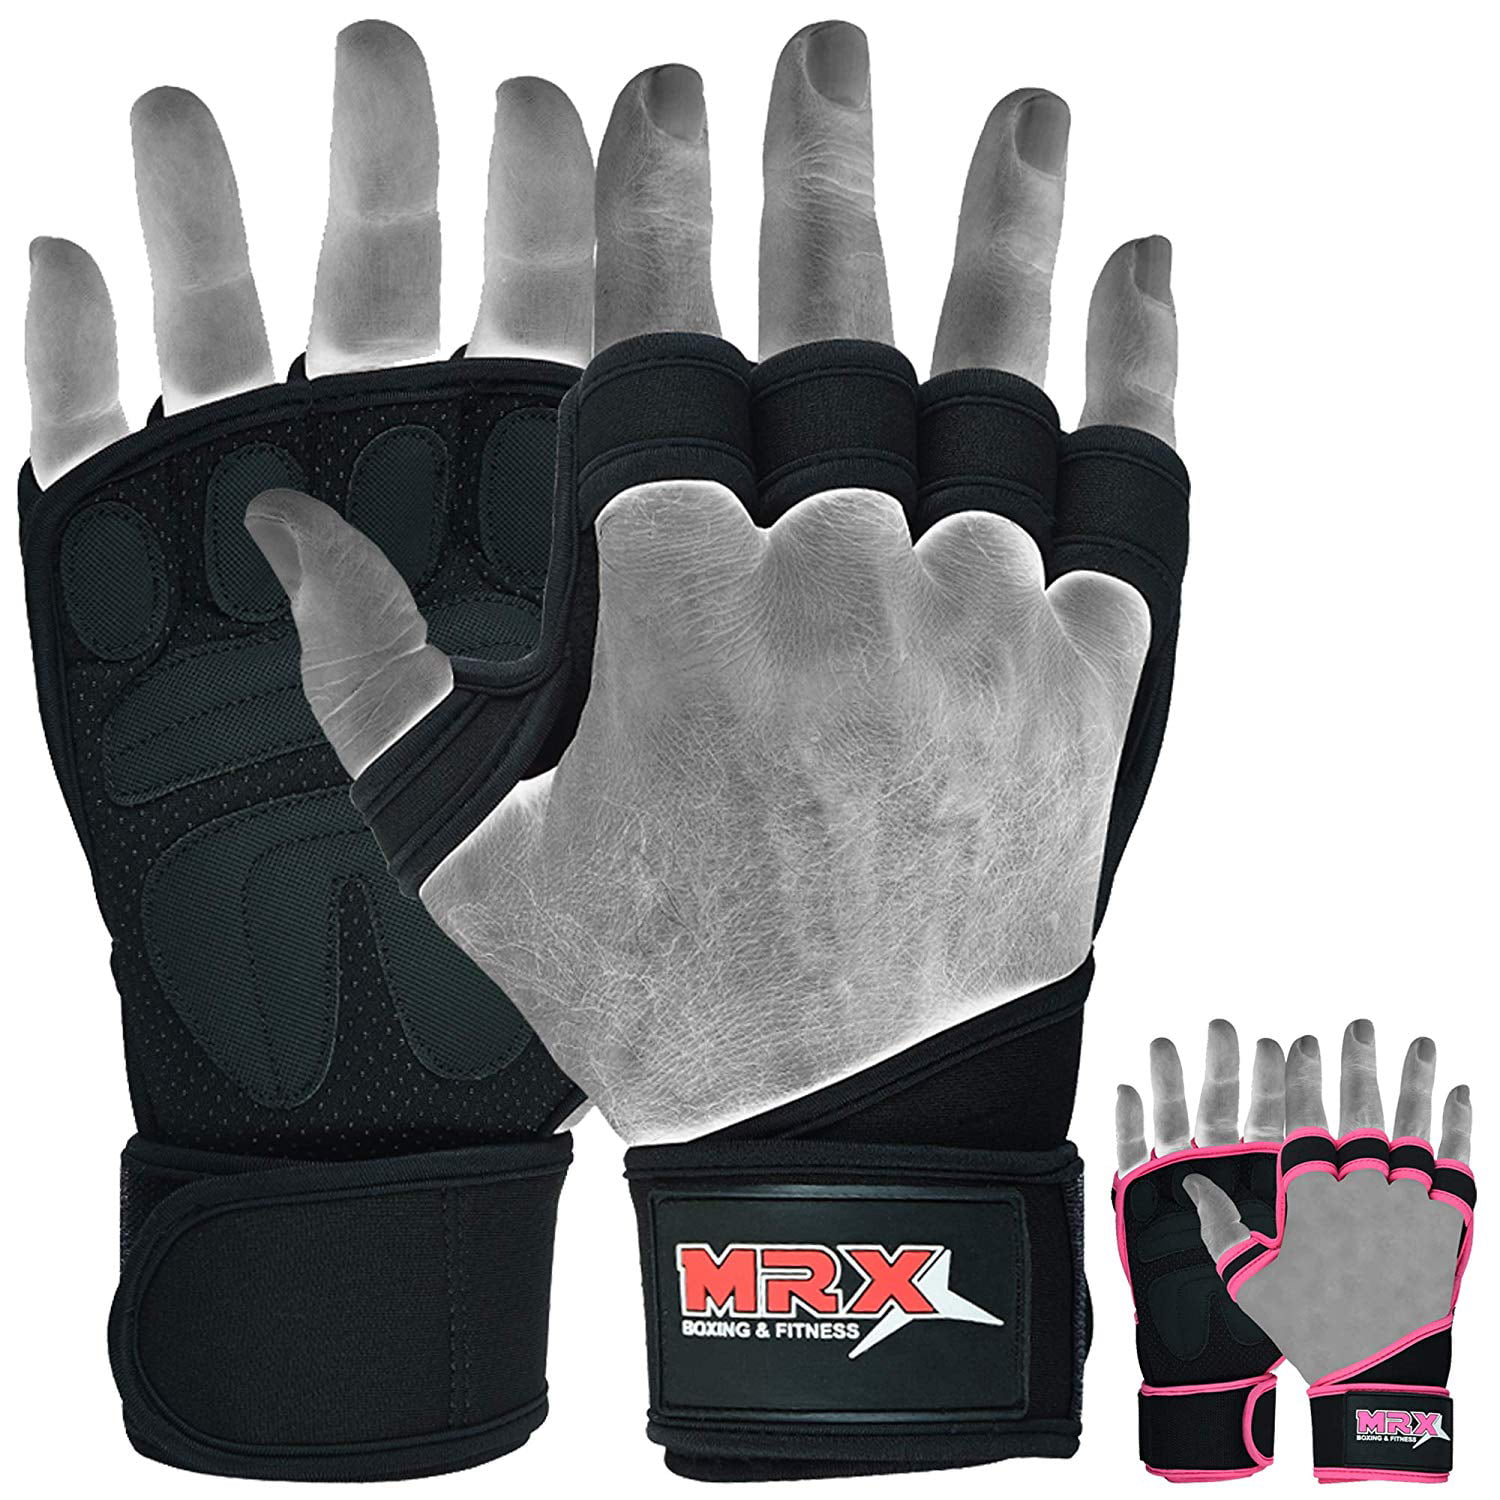 Wight Lifting Gloves Universal with Special Rubber Coating for Non-Slip Grip